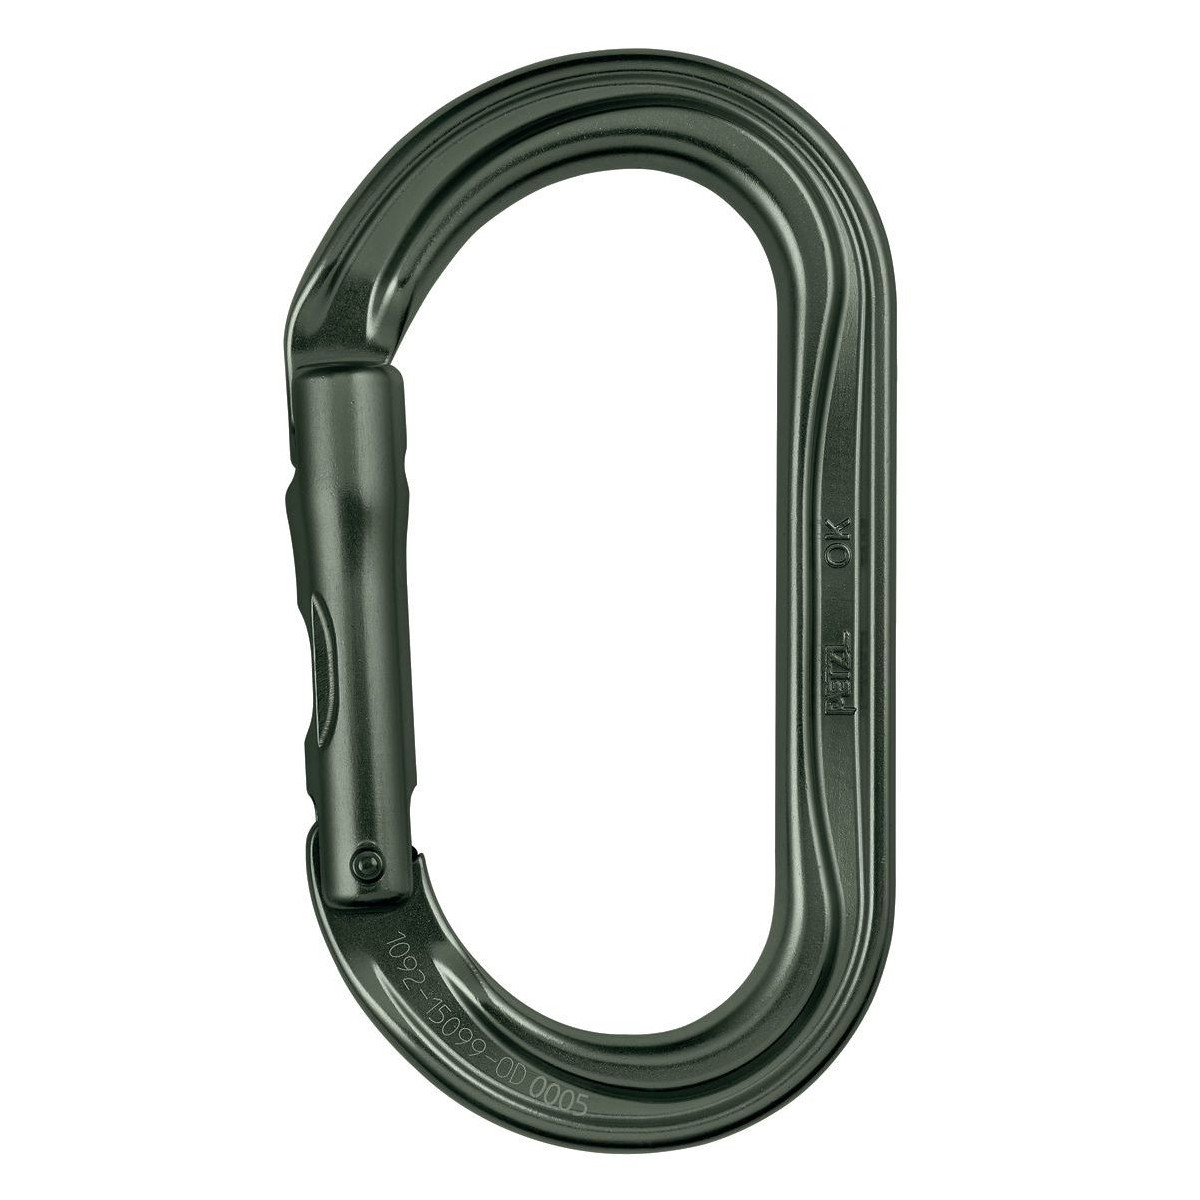 Petzl M33A G OK Without locking system green - Lightweight oval